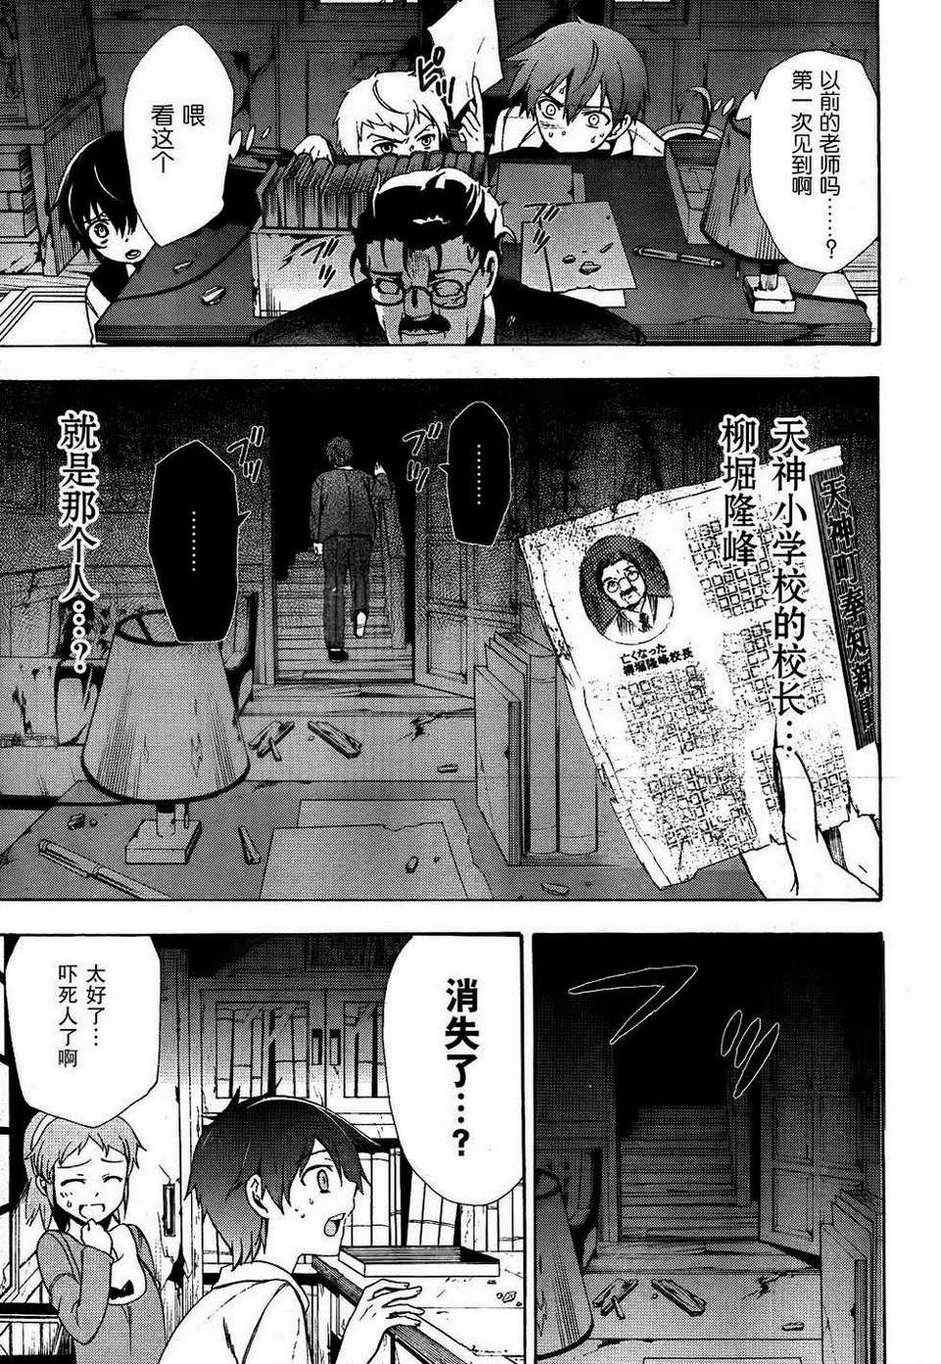 BLOOD_COVERED - 第39話 - 5